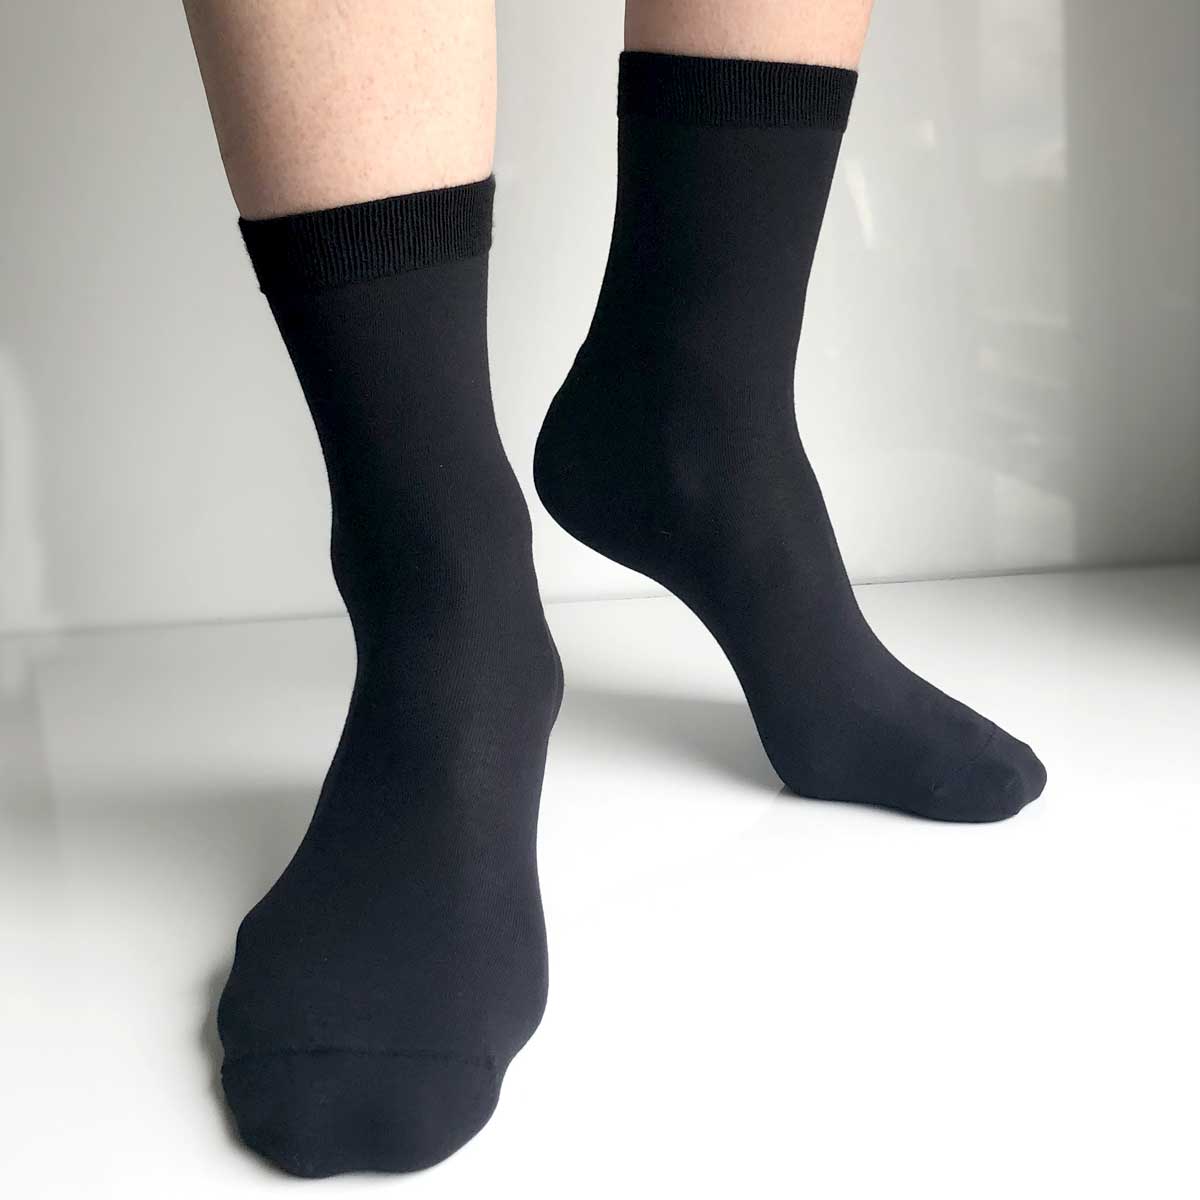 Extra thin and fine women's socks in 82% cotton